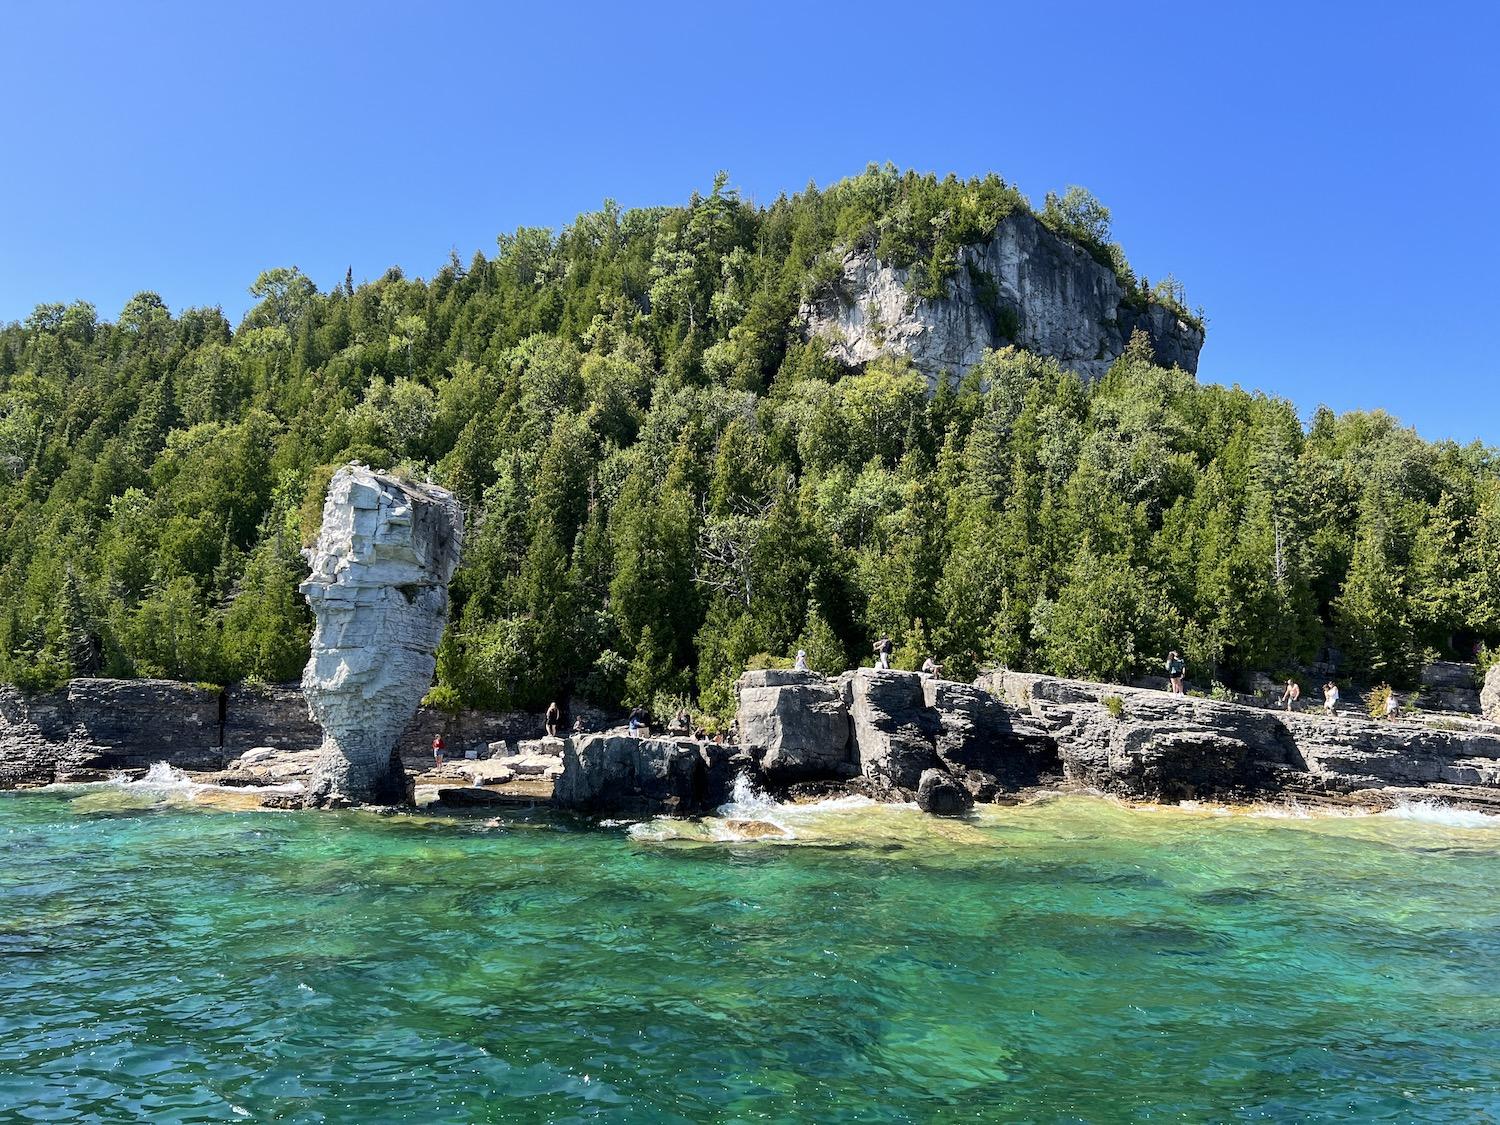 People congregate around the "large flowerpot" on Flowerpot Island in Fathom Five National Marine Park in Ontario.